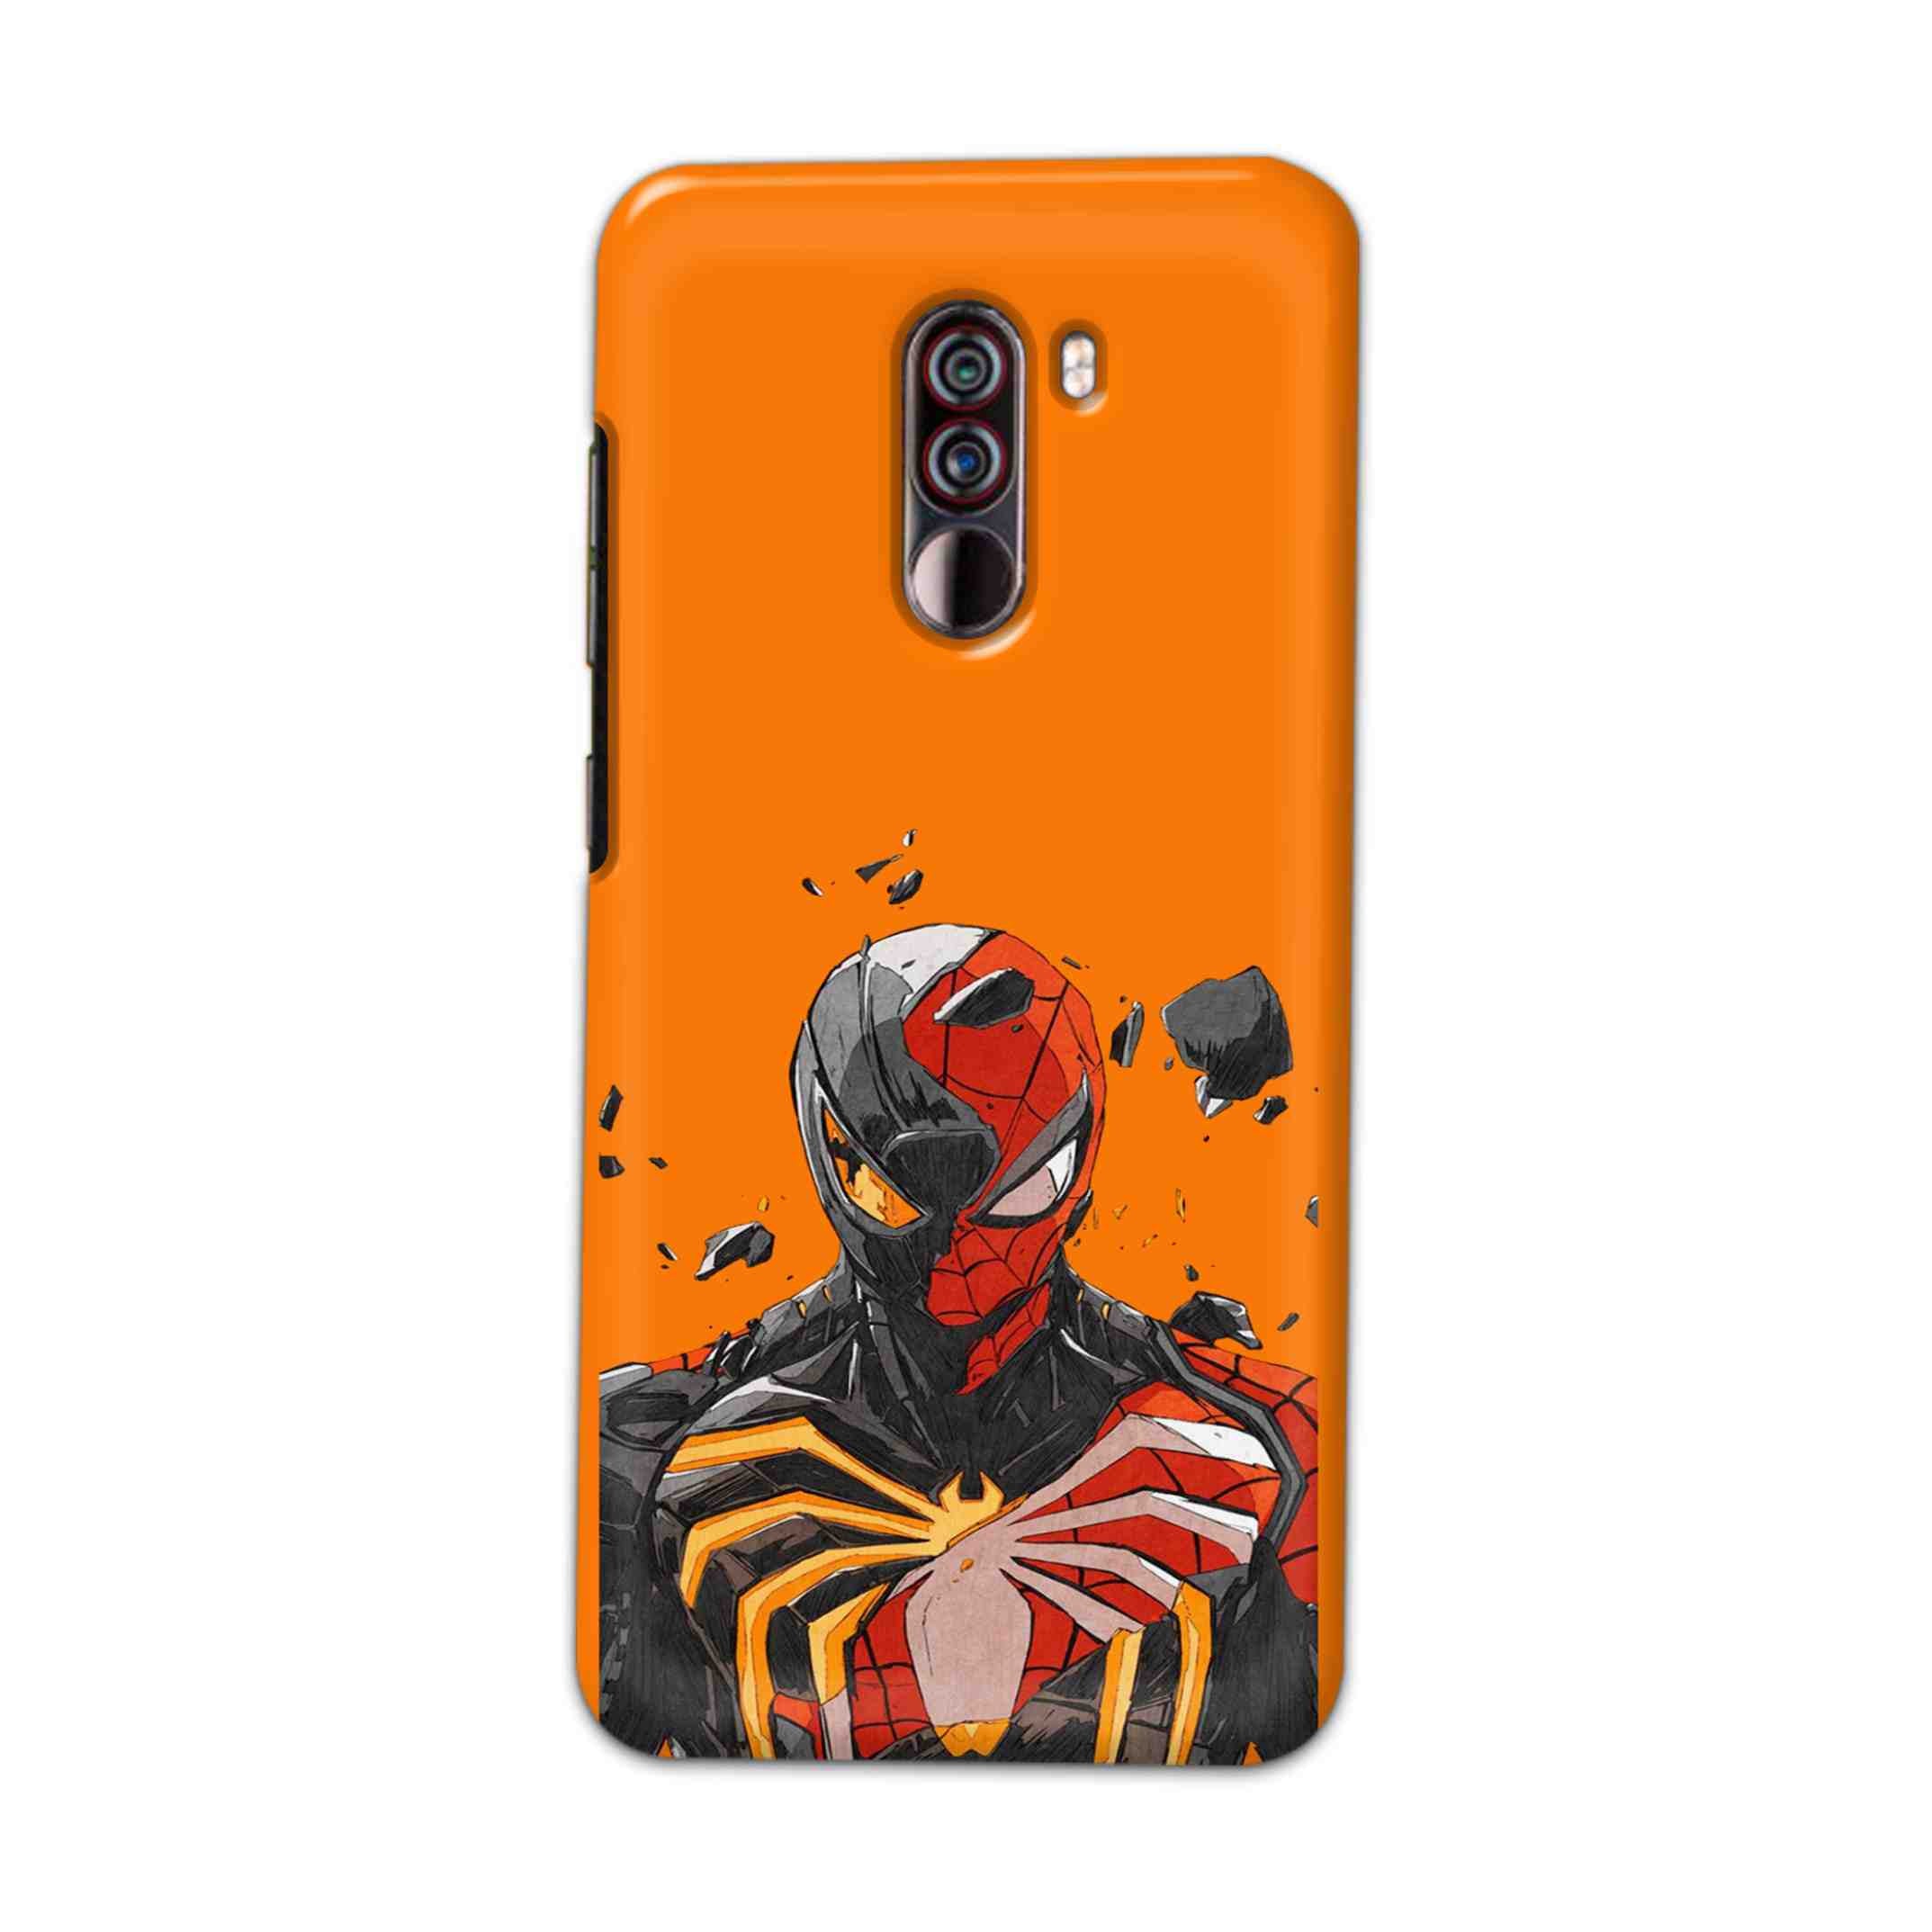 Buy Spiderman With Venom Hard Back Mobile Phone Case Cover For Xiaomi Pocophone F1 Online